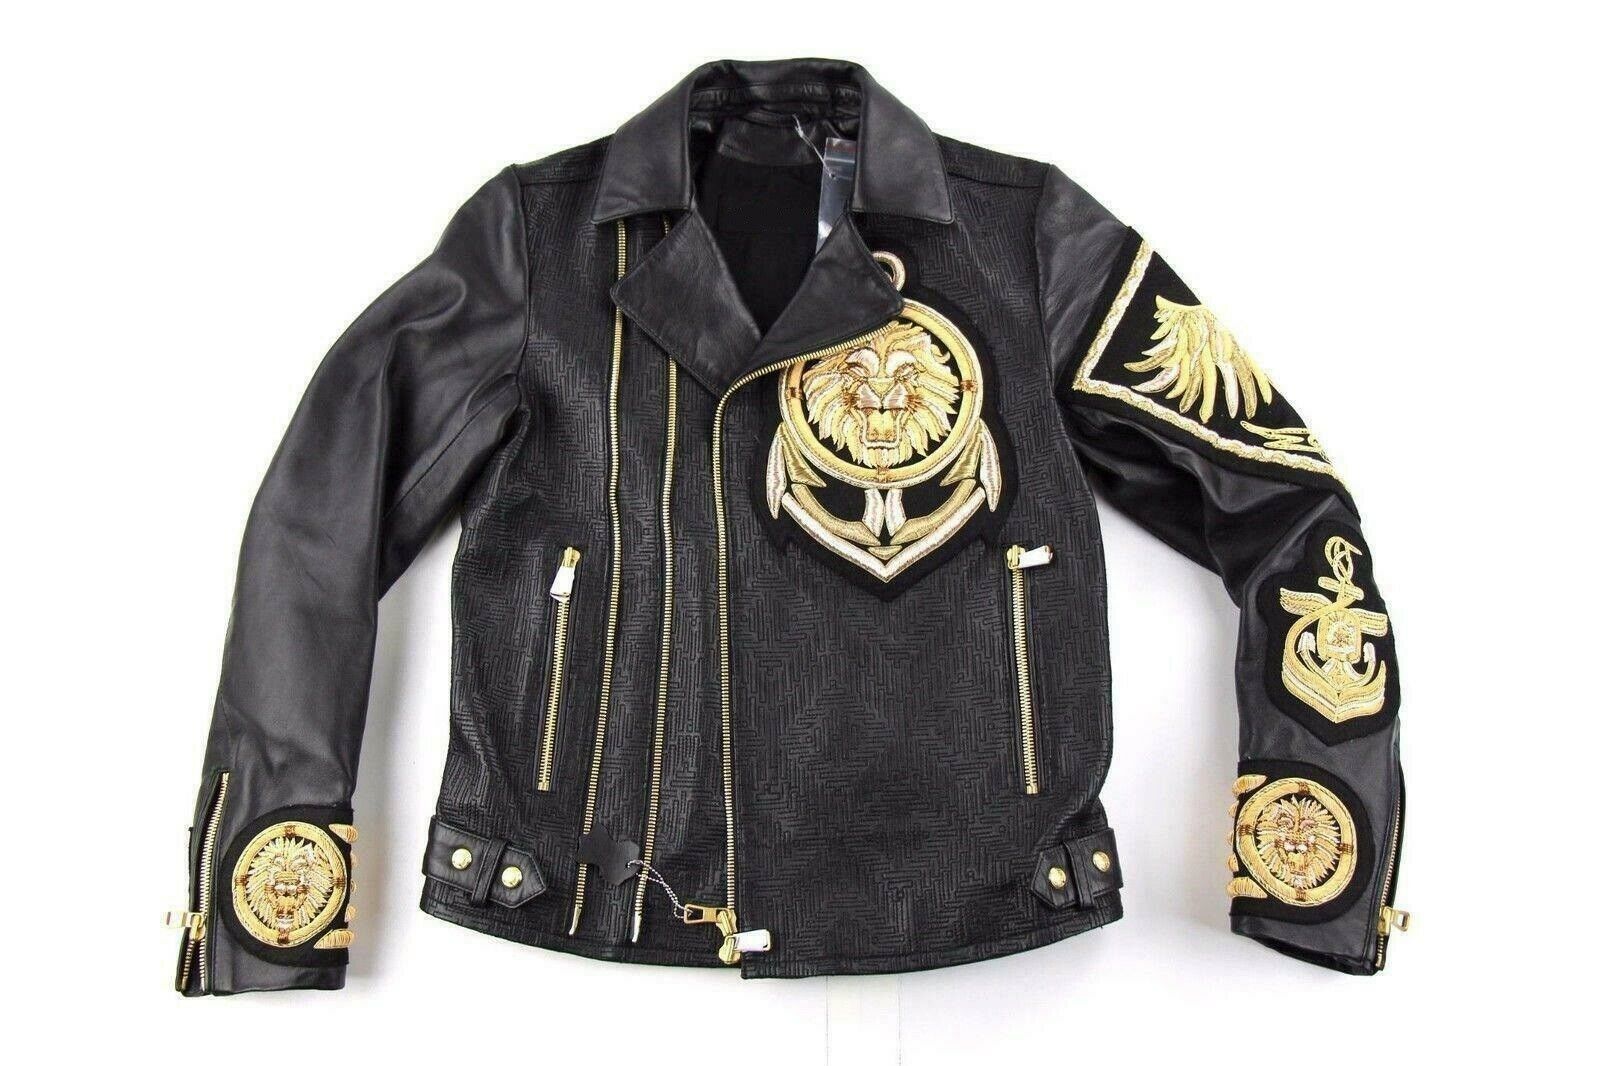 Handmade Embroidery Patches Golden Black Style Leather Jacket